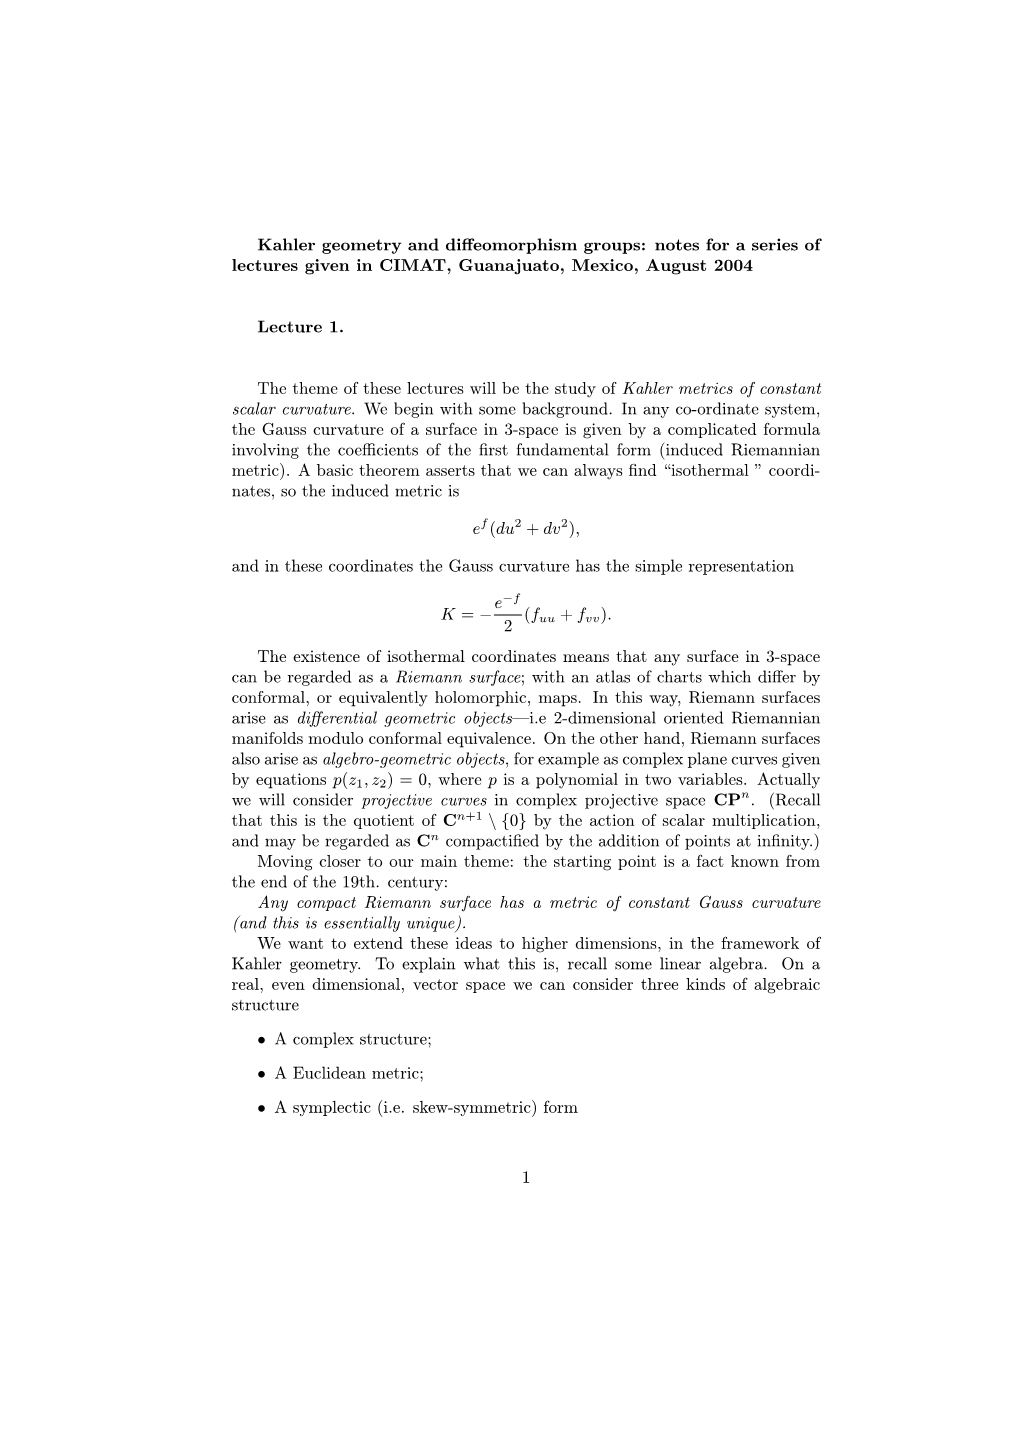 Kahler Geometry and Diffeomorphism Groups: Notes for a Series of Lectures Given in CIMAT, Guanajuato, Mexico, August 2004